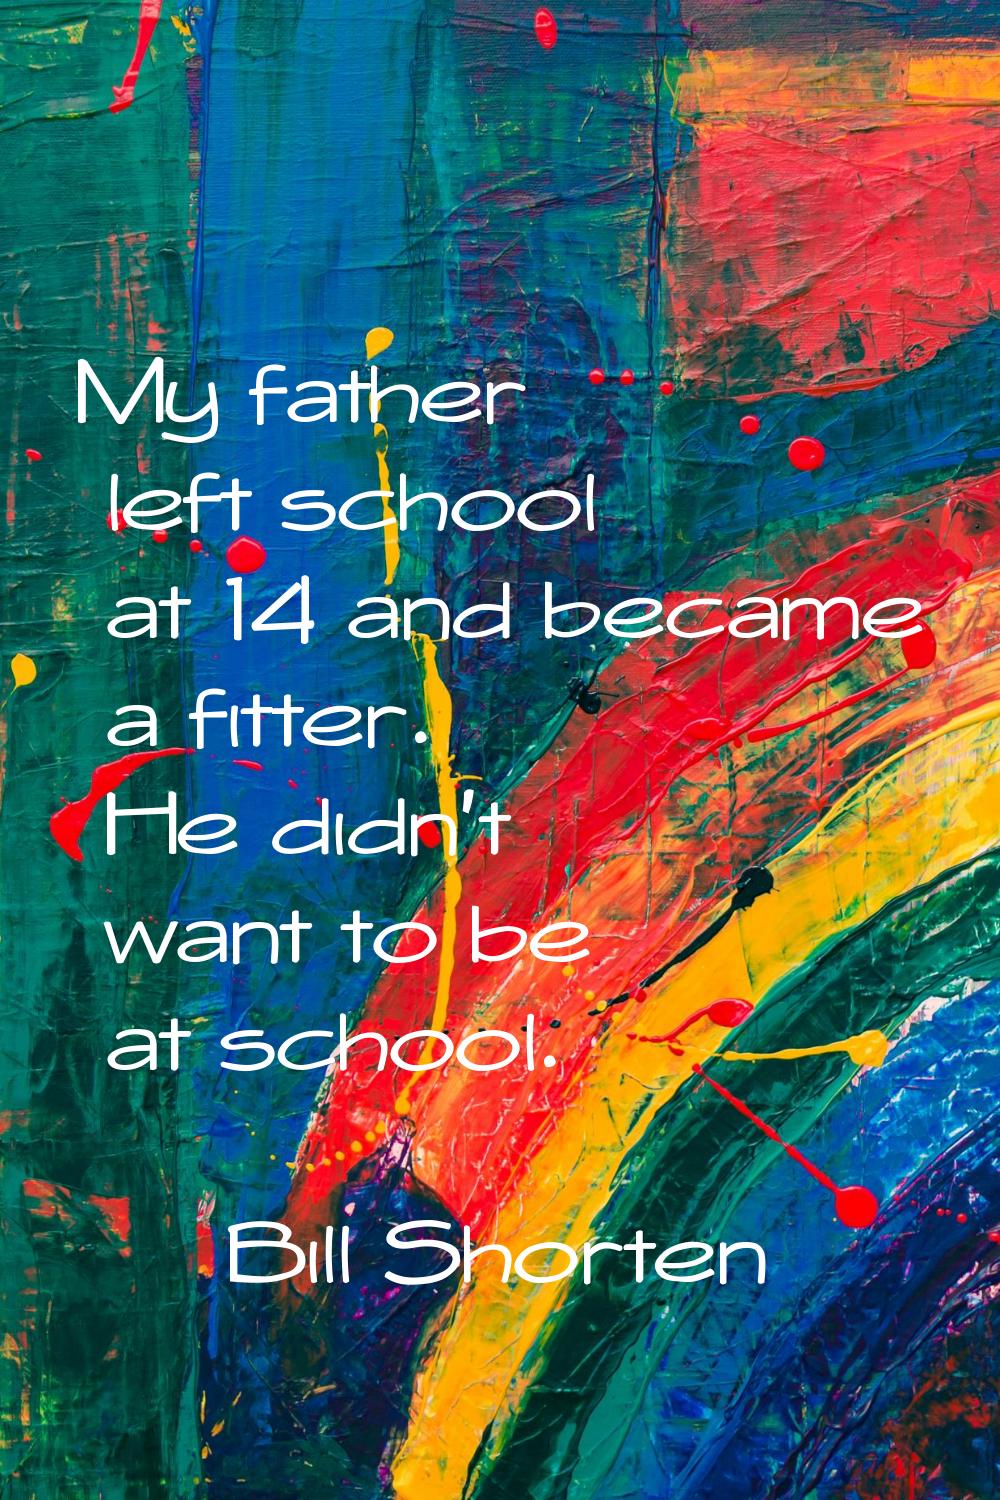 My father left school at 14 and became a fitter. He didn't want to be at school.